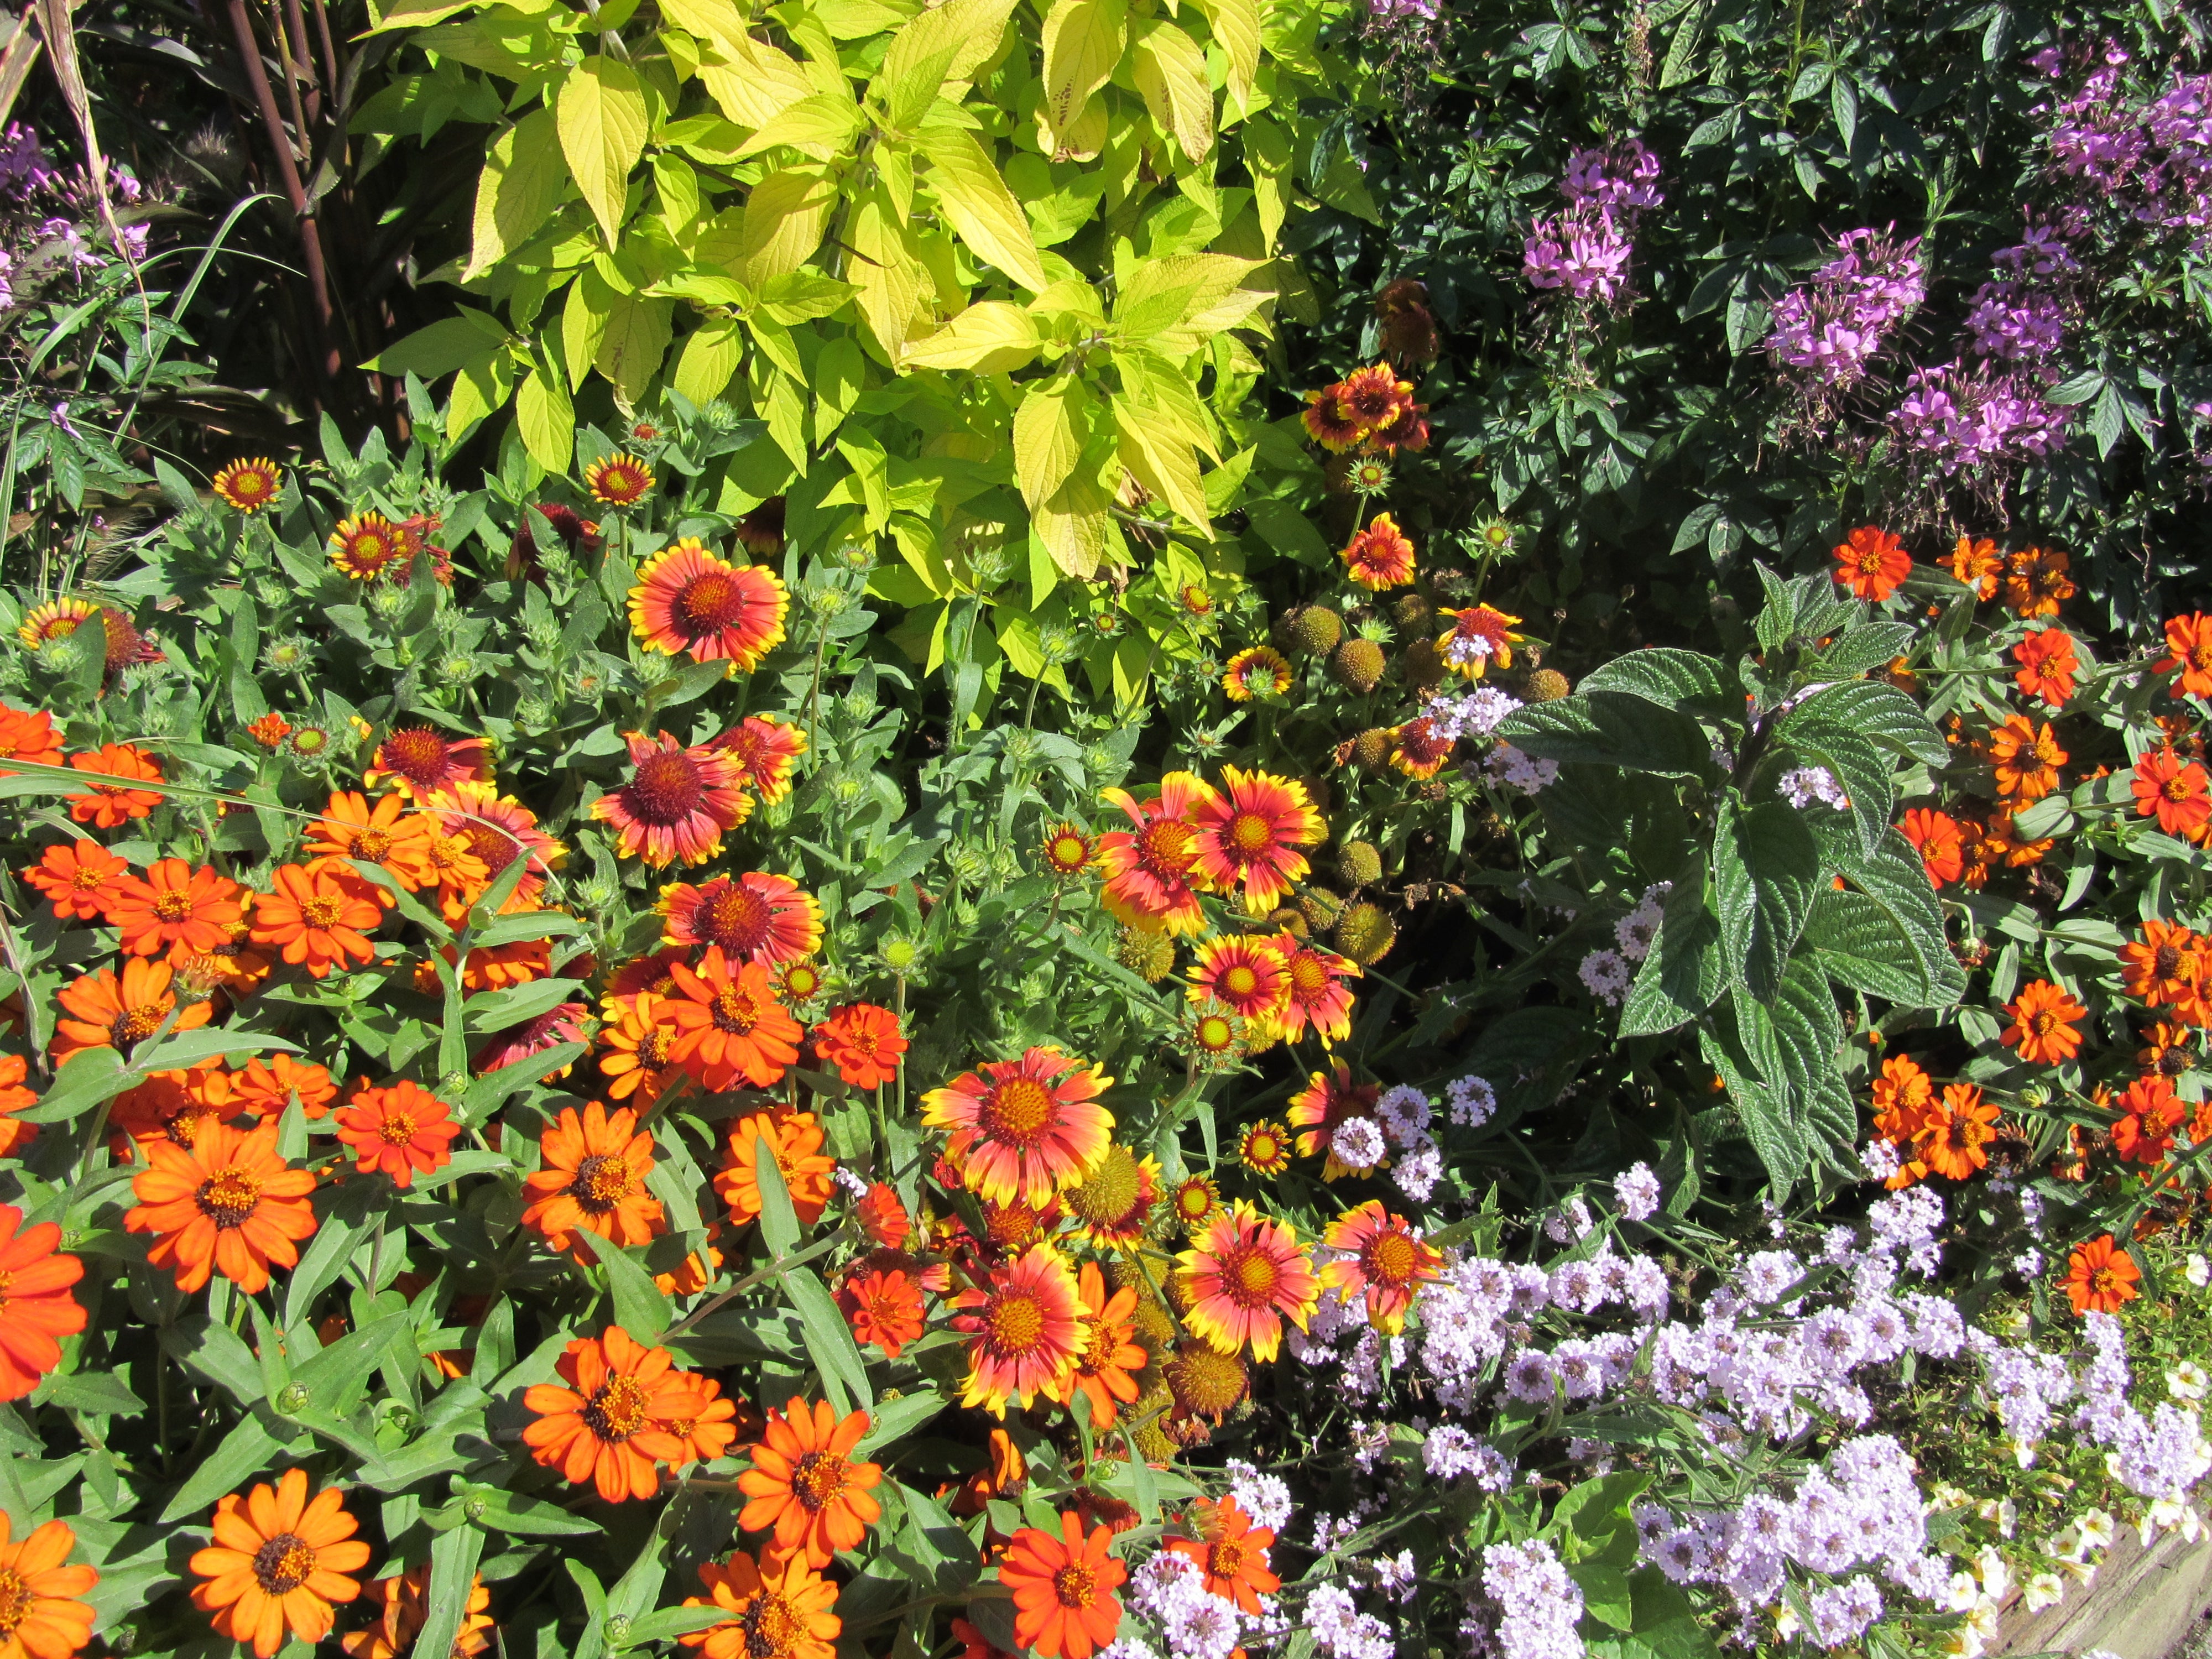 Gallardia (Blanket Flower) surrounded by annuals (orange Zinnias, pale mauve Verbena and Magenta Cleome)